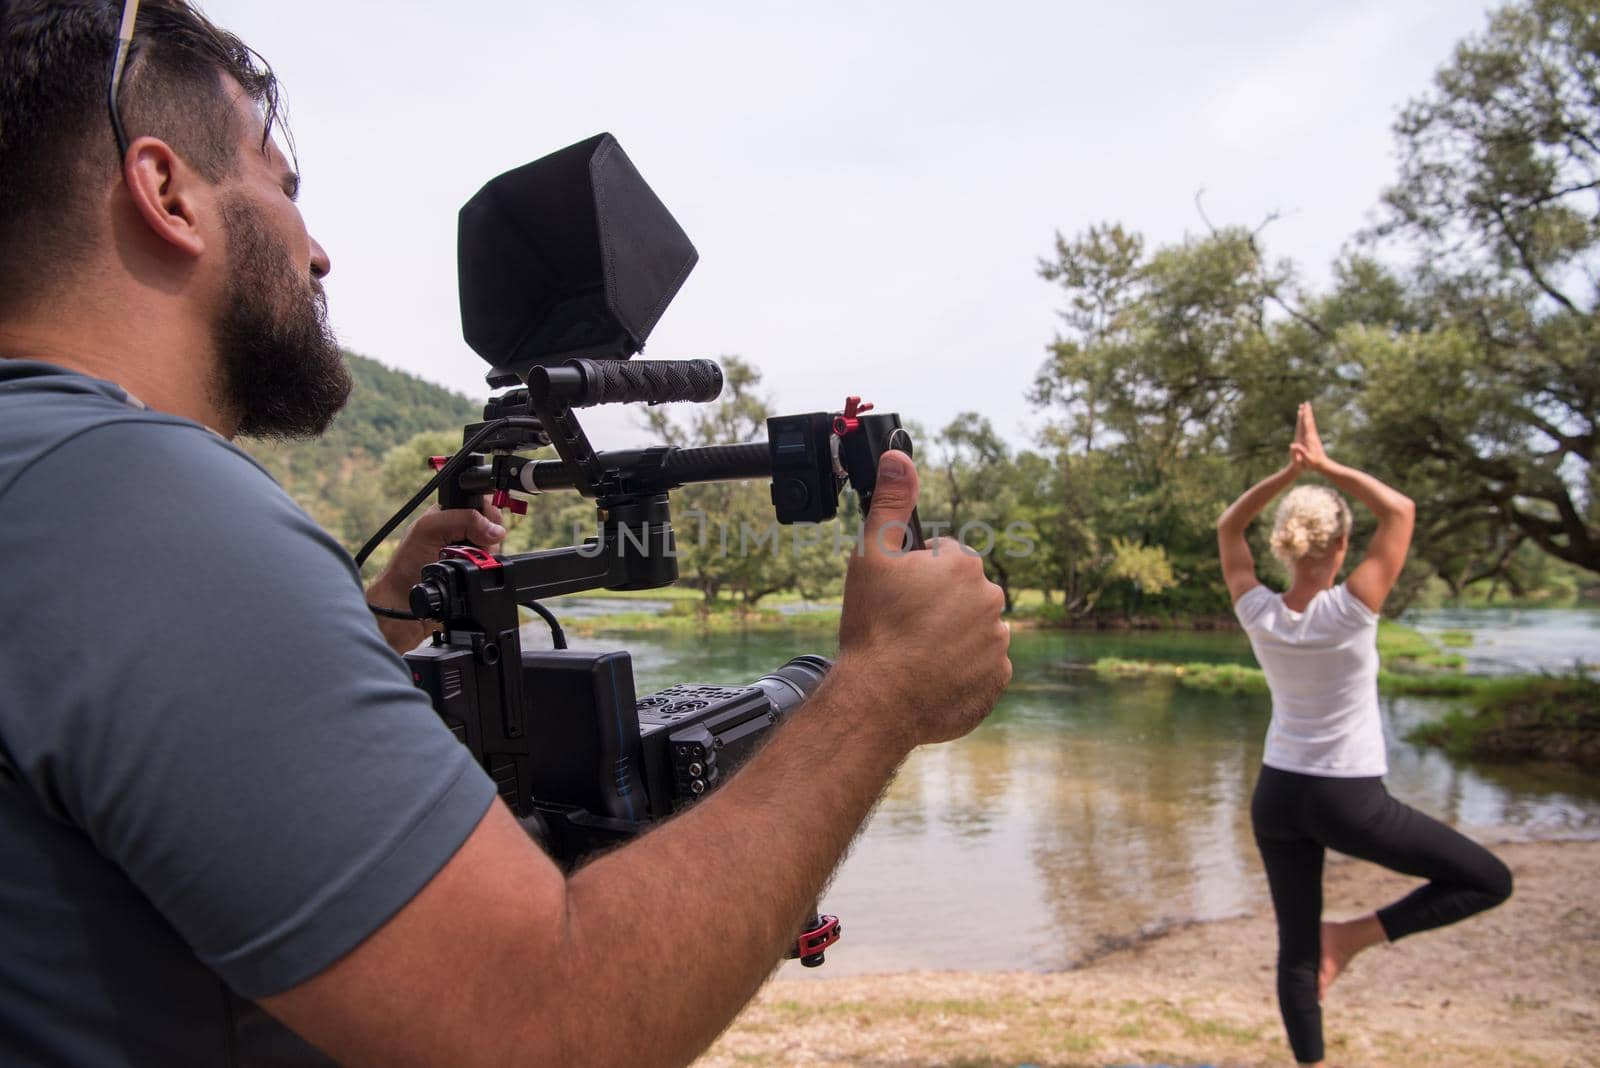 young videographer with gimball video slr rocording while healthy woman doing yoga exercise in the beautiful nature on the bank of the river